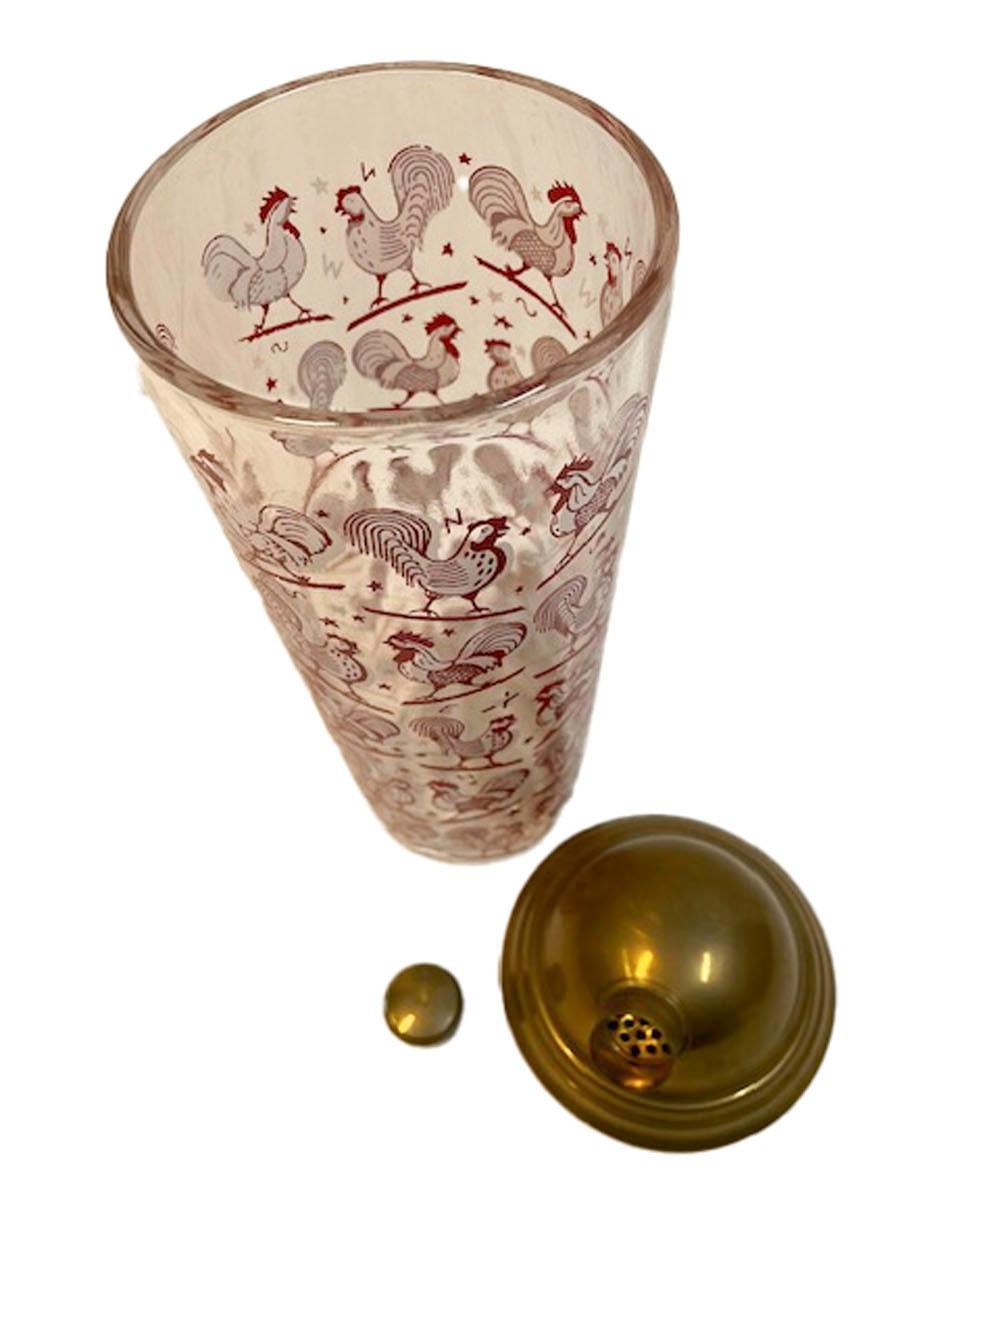 Art Deco cocktail shaker decorated with red and white enamel roosters on clear glass and with a domed gold-tone lid.